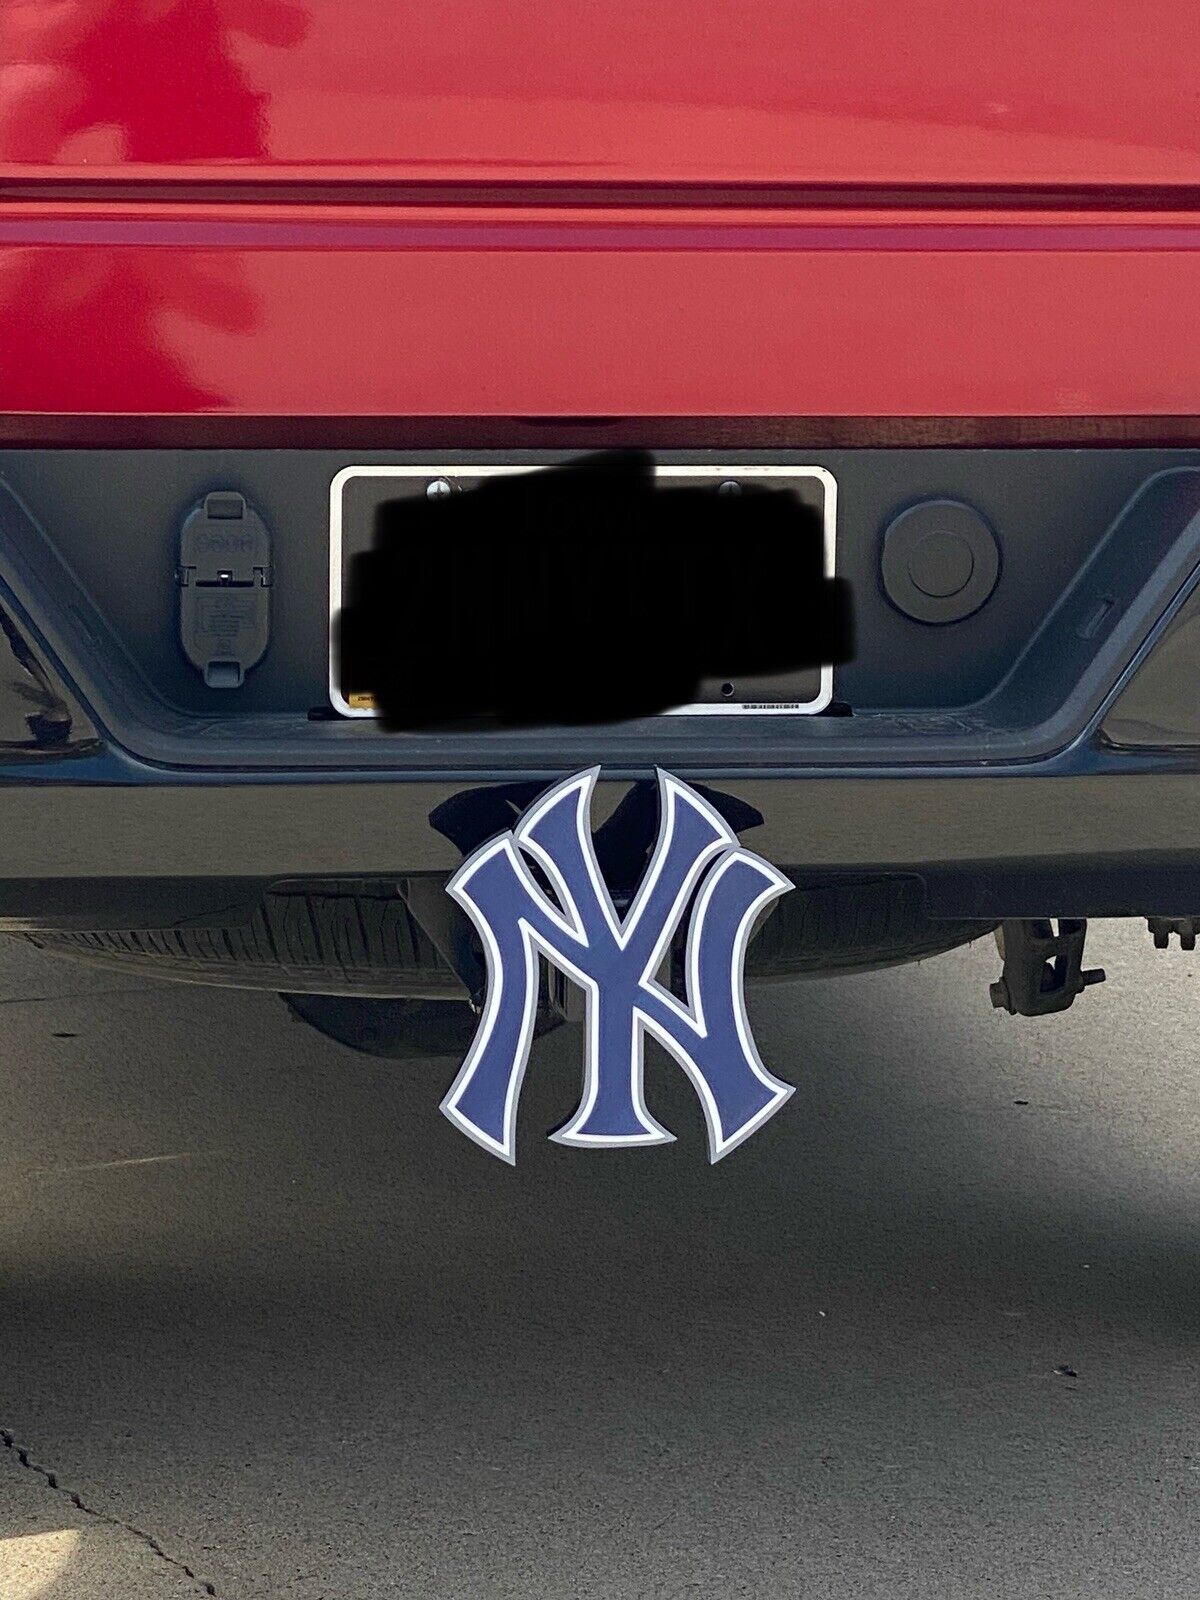 New York Yankee Truck Hitch Cover Professional Baseball Truck Decoration 8inx8in